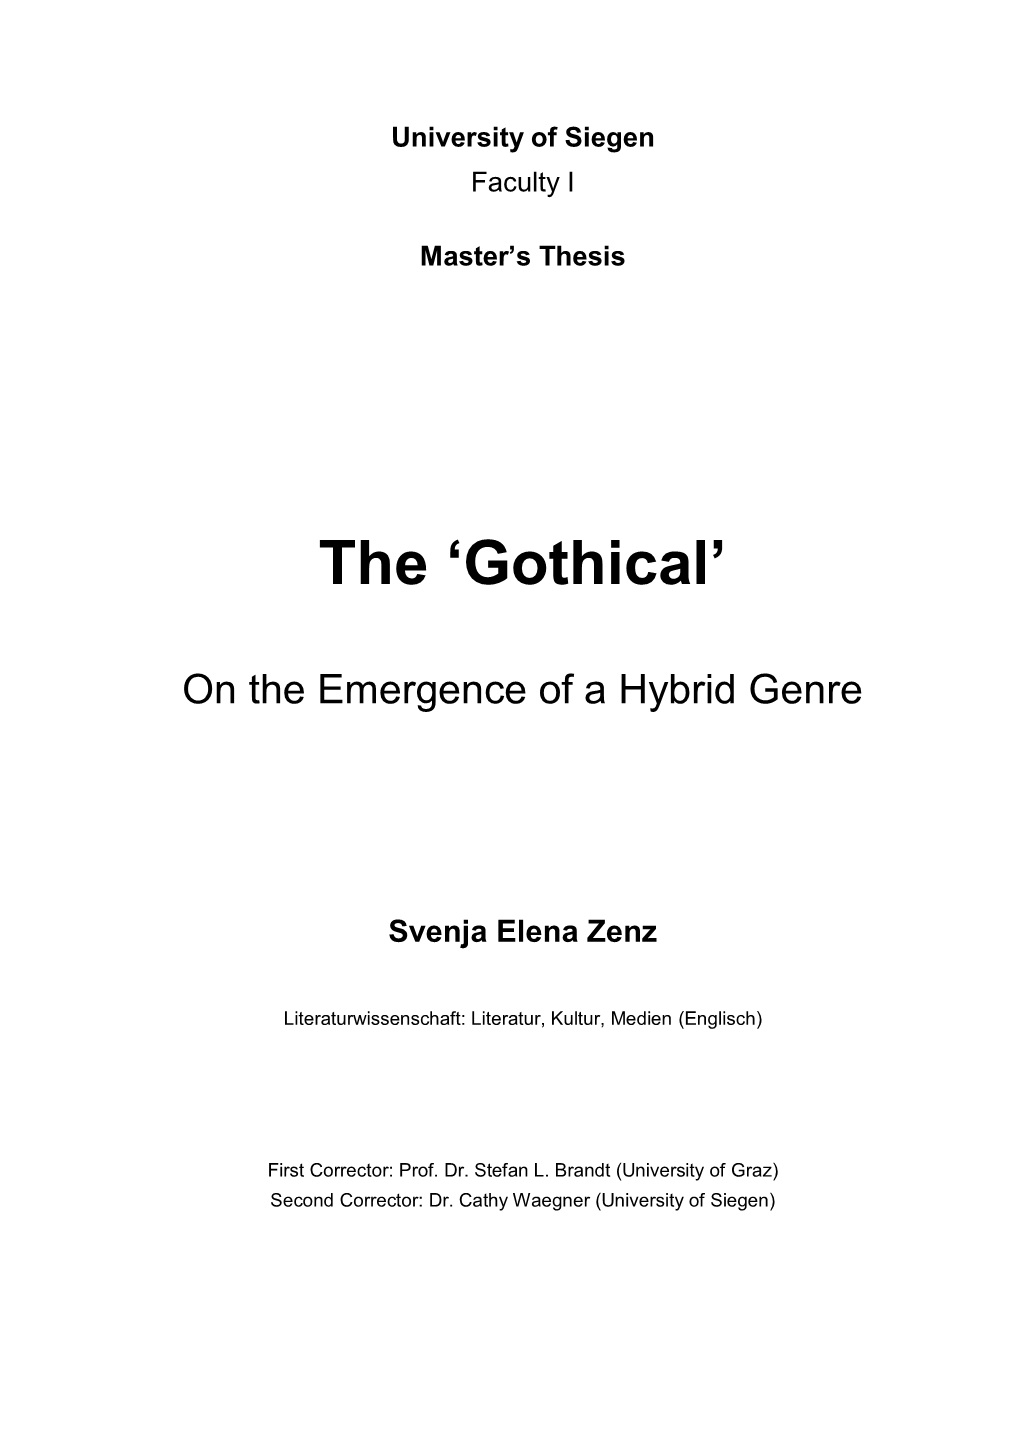 The 'Gothical'